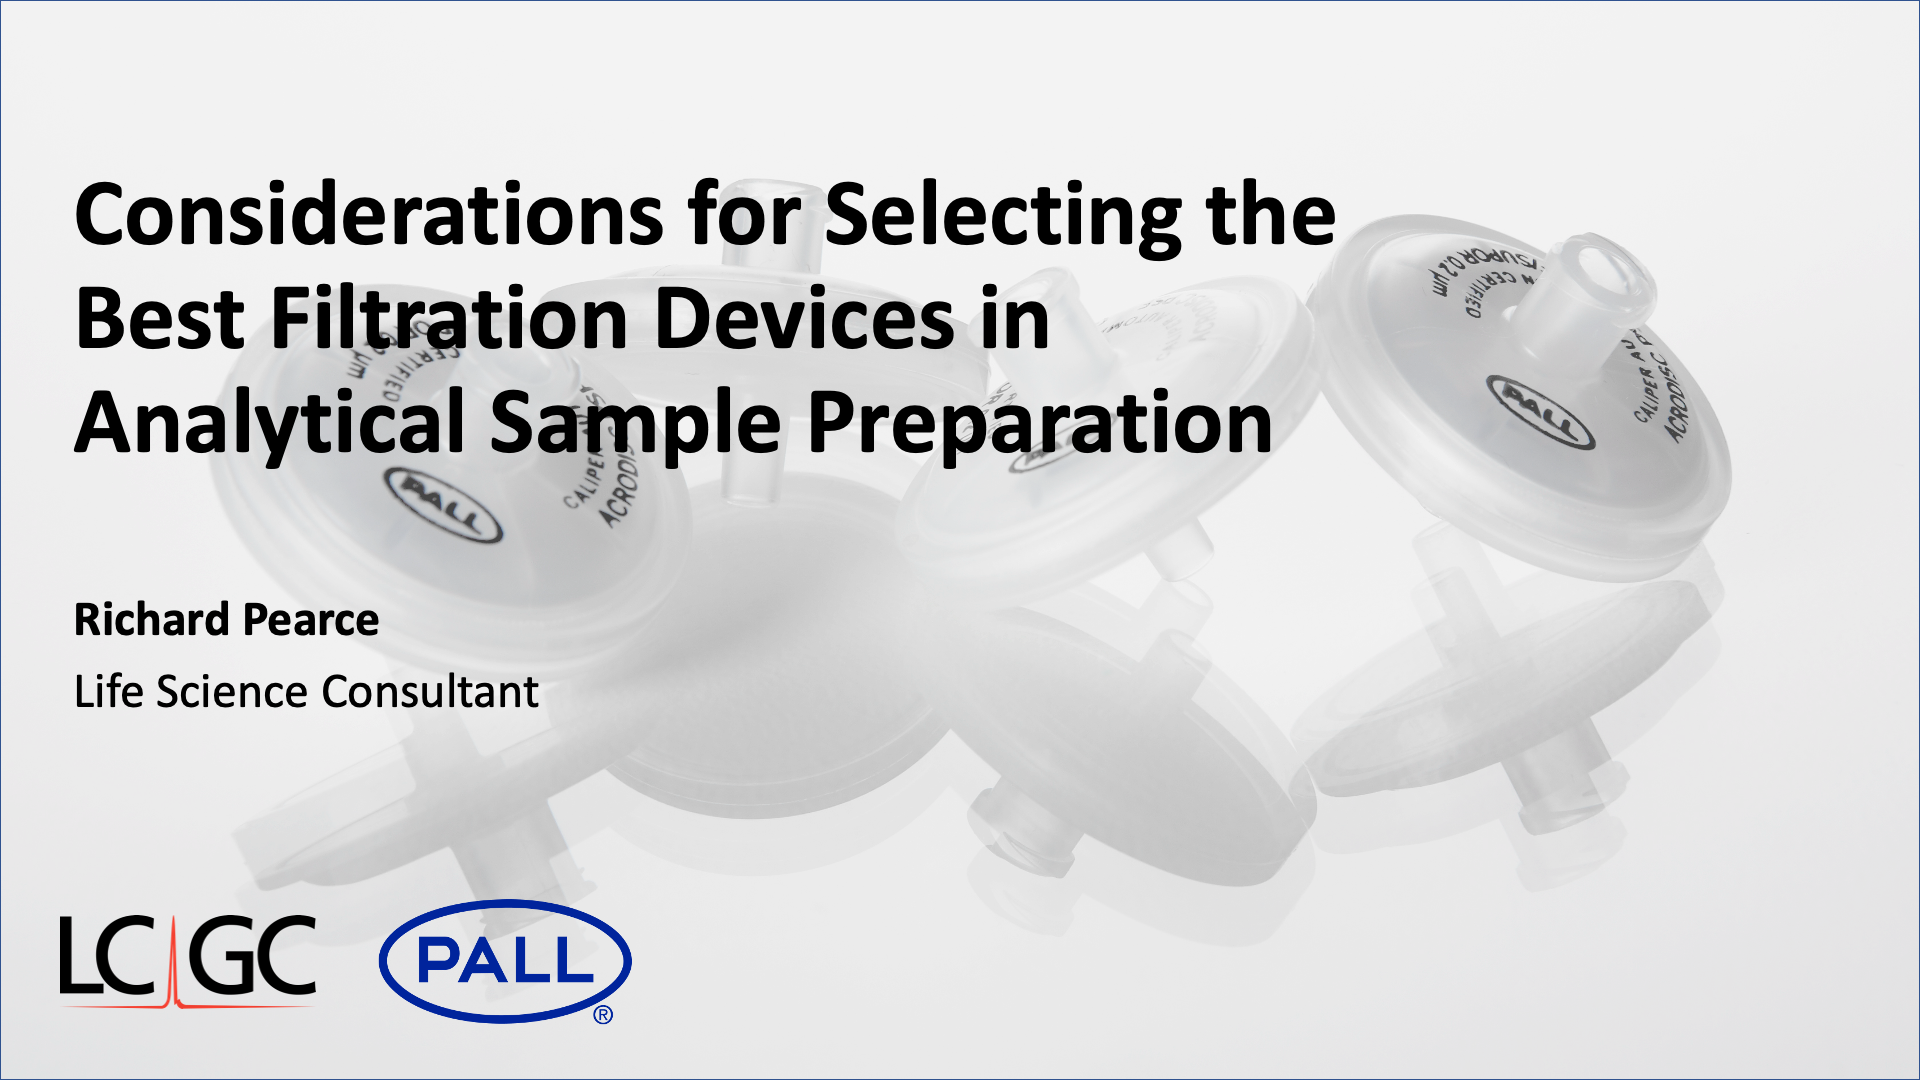 Considerations for Selecting the Best Filtration Devices in Analytical Sample Preparation.